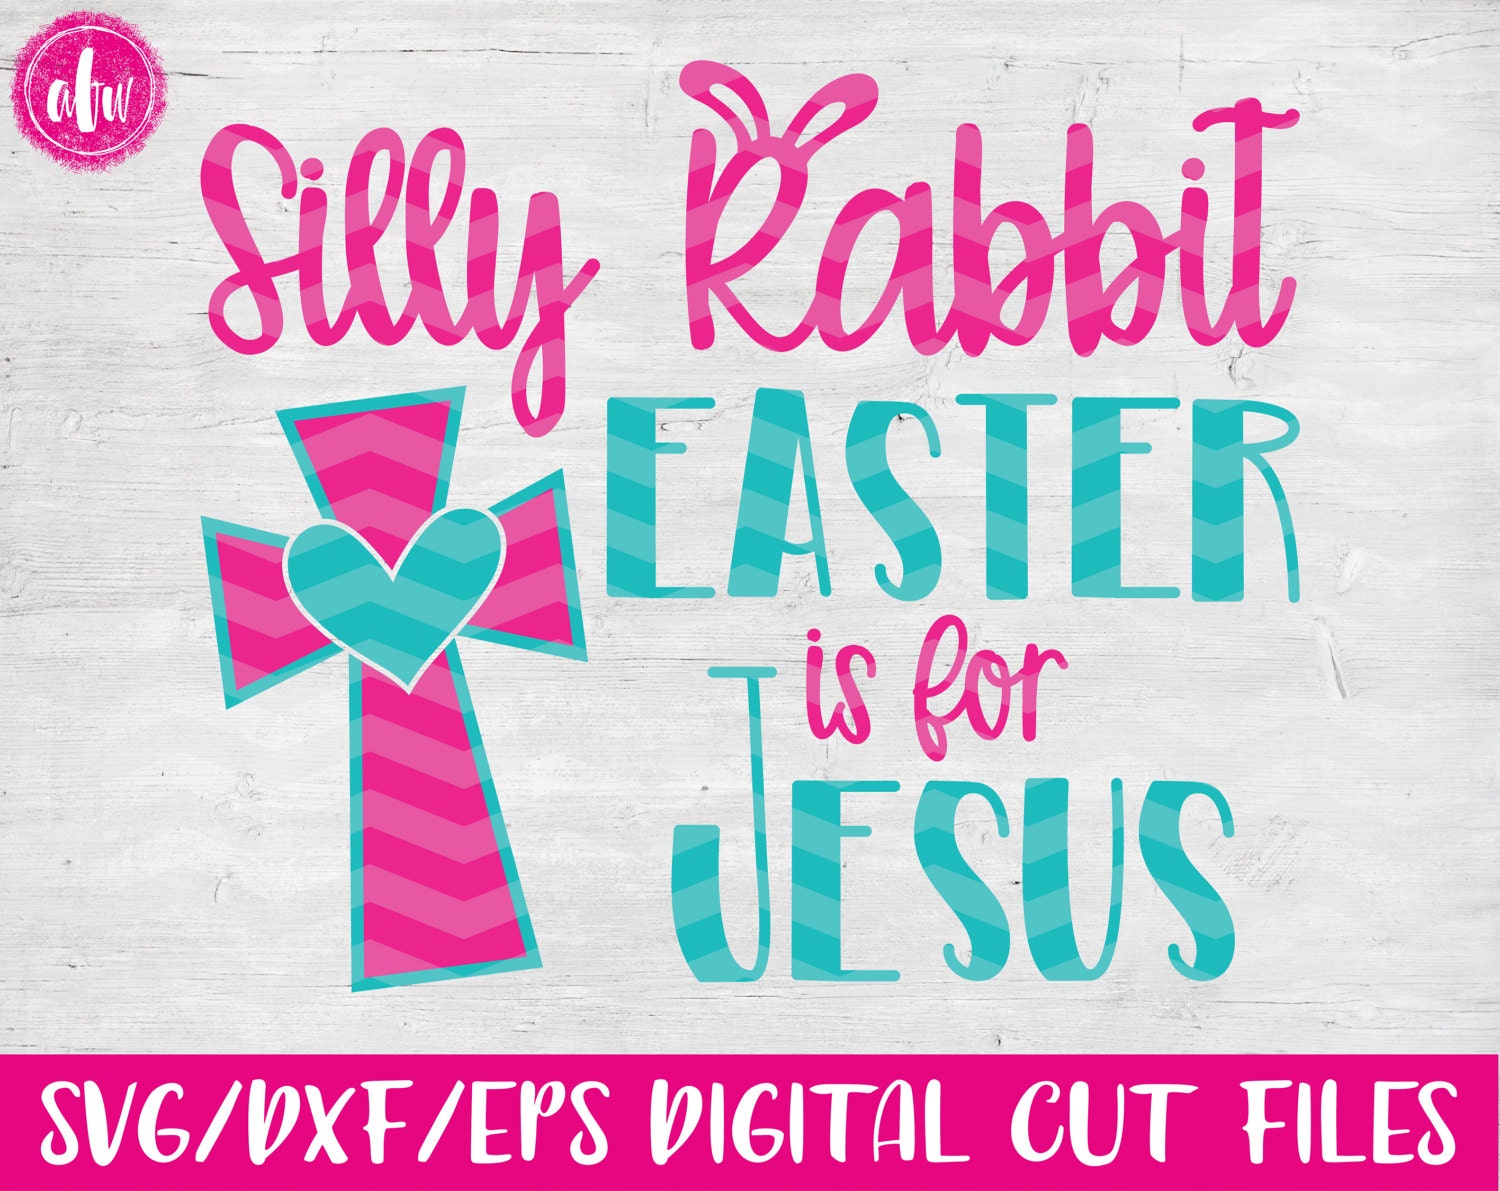 Silly Rabbit Easter is for Jesus SVG DXF EPS Cut File